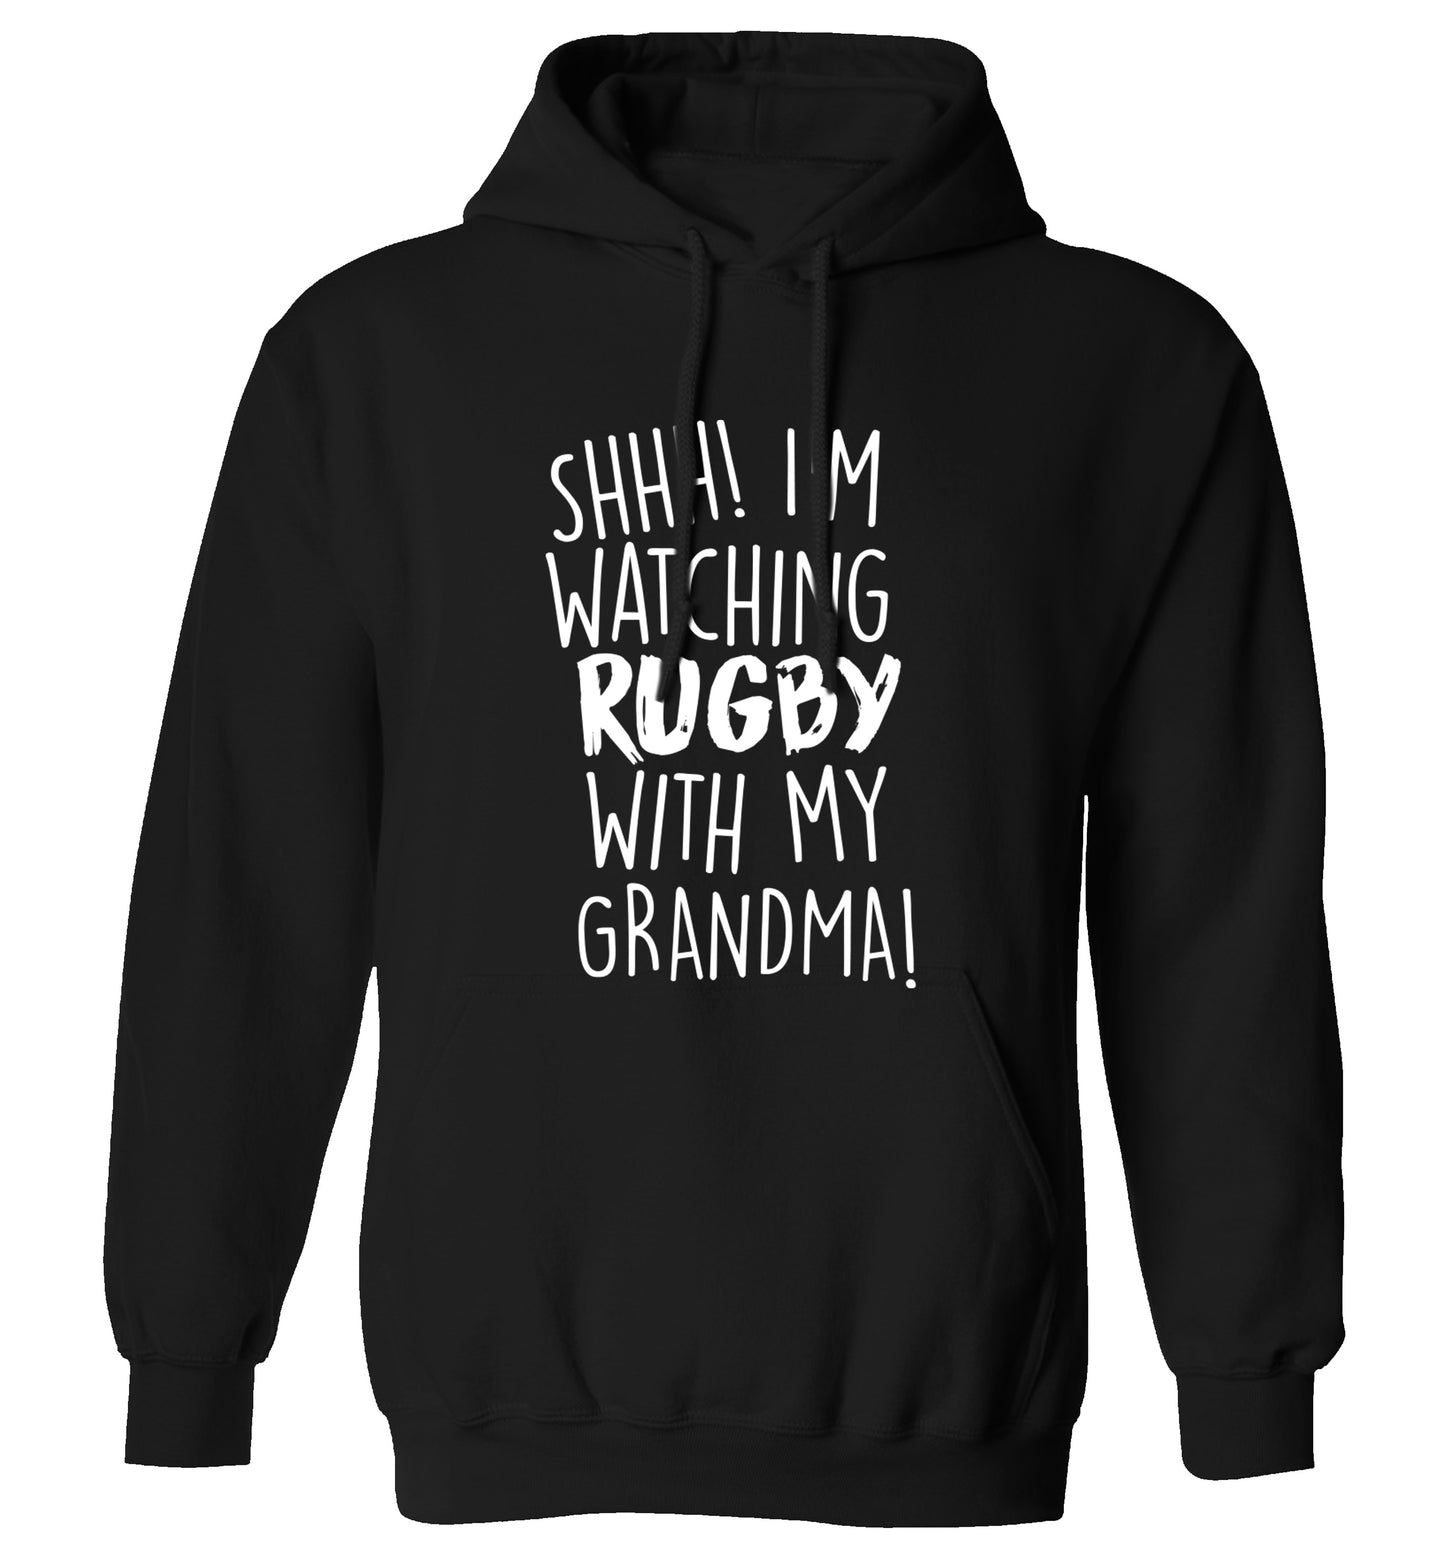 Shh I'm watching rugby with my grandma adults unisex black hoodie 2XL